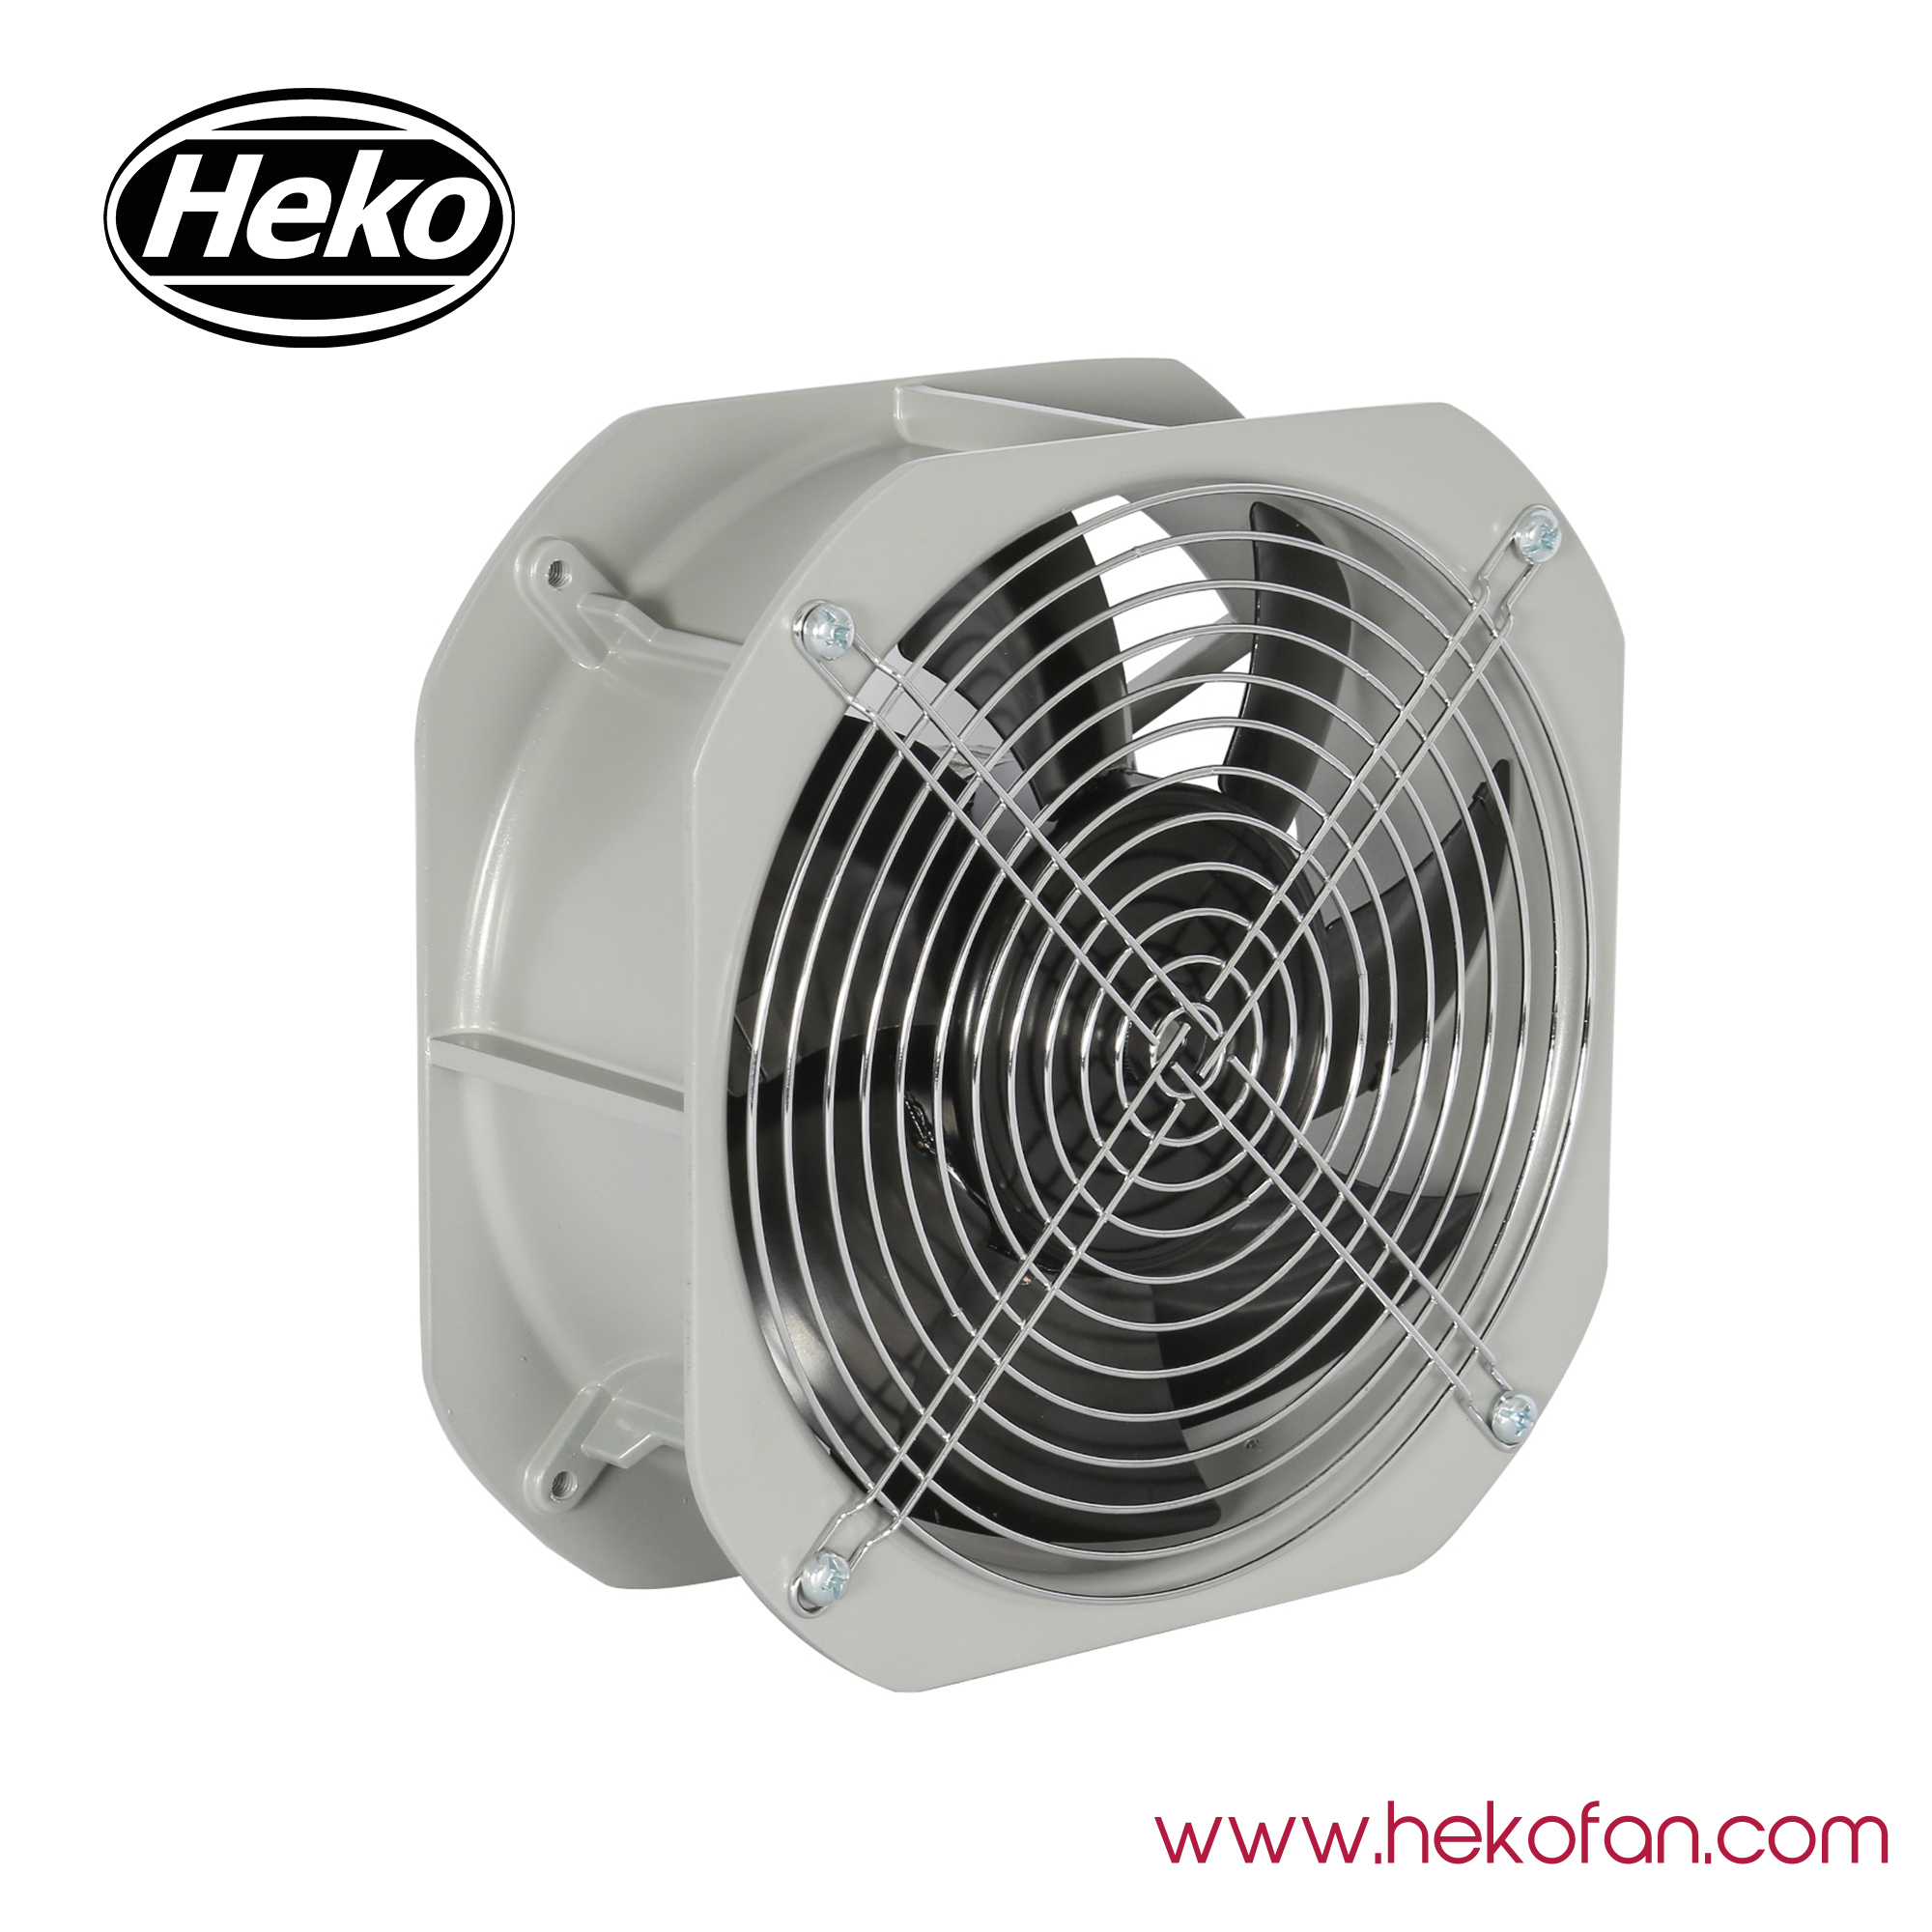 HEKO DC200mm 24V 48V Cooling Axial Fan For Greenhouses 